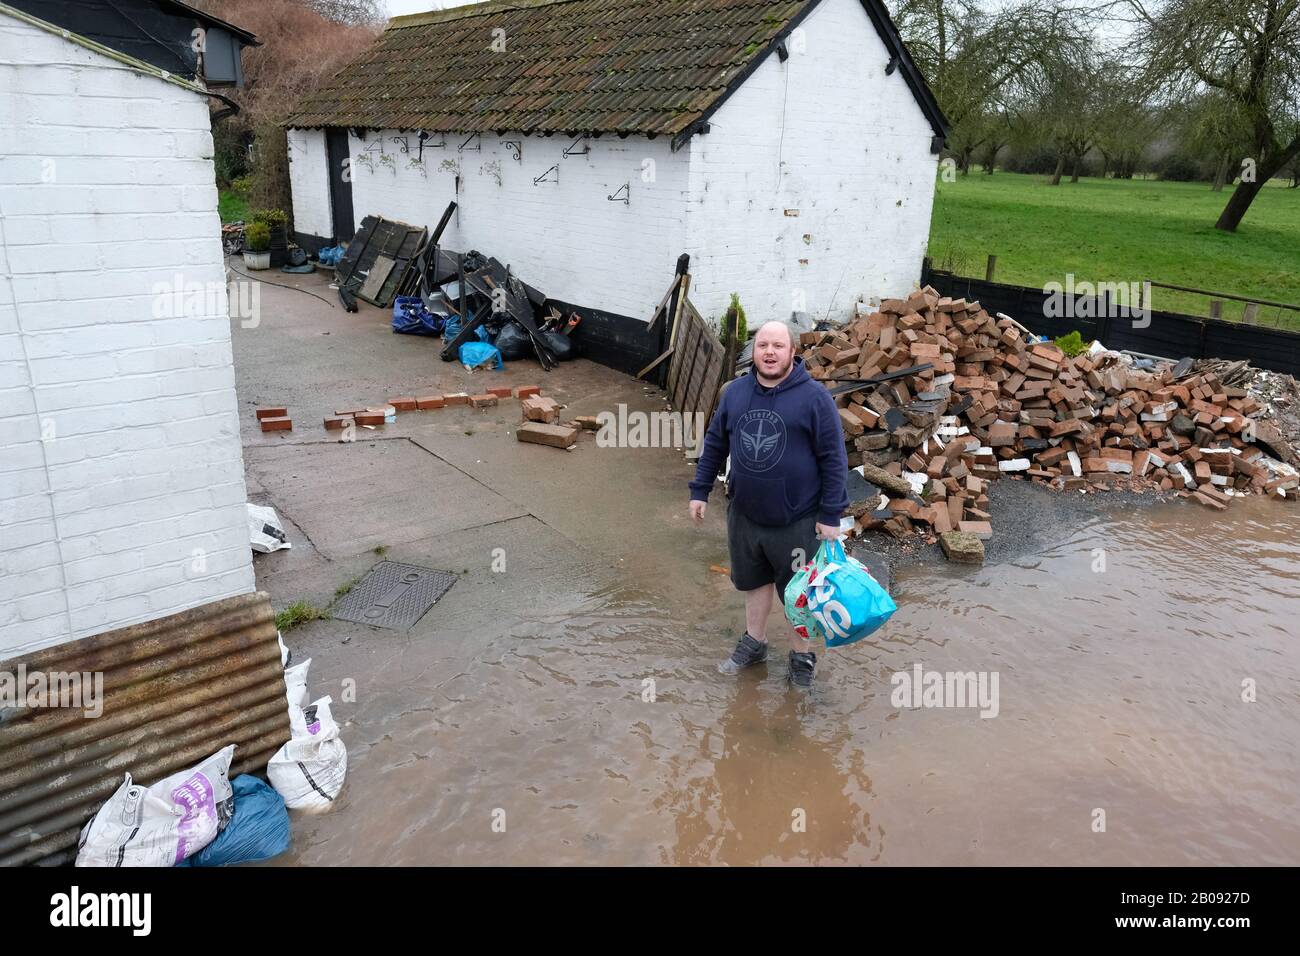 Hampton Bishop, Herefordshire, UK - Wednesday 19th February 2020 - A resident is happy to receive fresh food supplies delivered by tractor - the community of Hampton Bishop is currently cut off by flood water. The village is surrounded by water from both the River Wye and the River Lugg. Two of the six Severe Flood Warnings in England relate to Hampton Bishop, Herefordshire. Photo Steven May / Alamy Live News Stock Photo